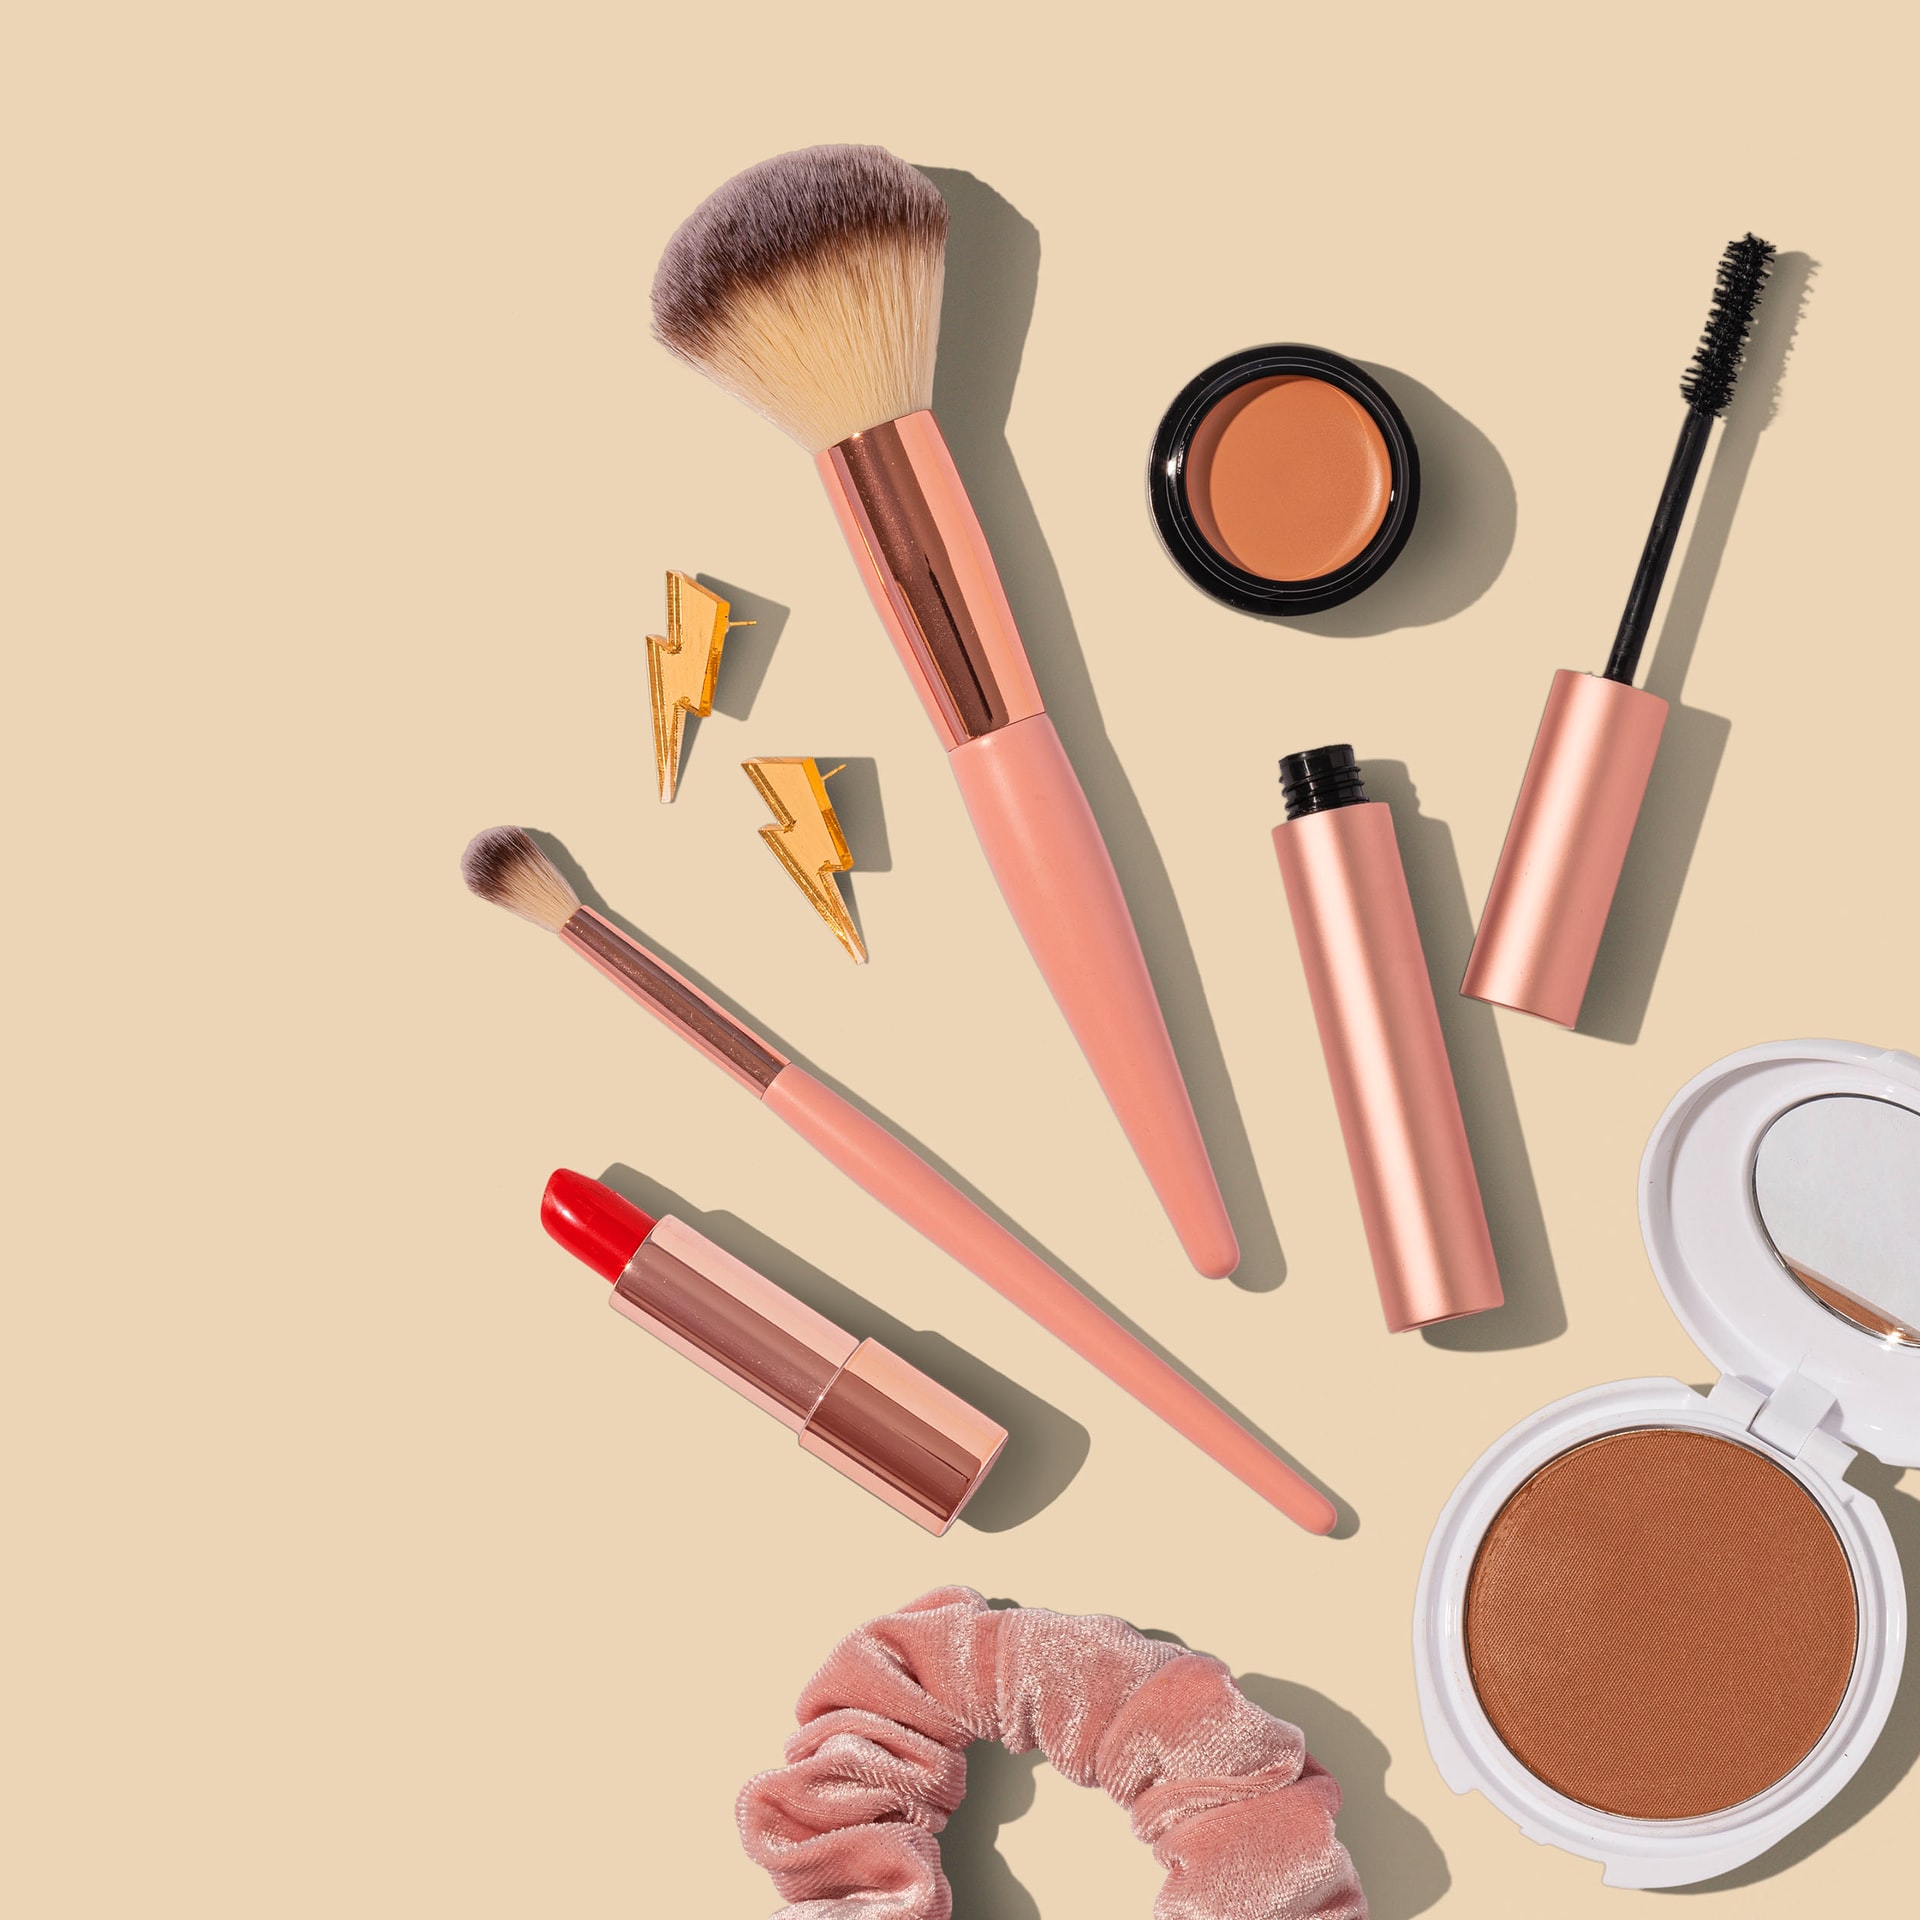 Many cosmetics contain hidden PFAS, or 'forever chemicals